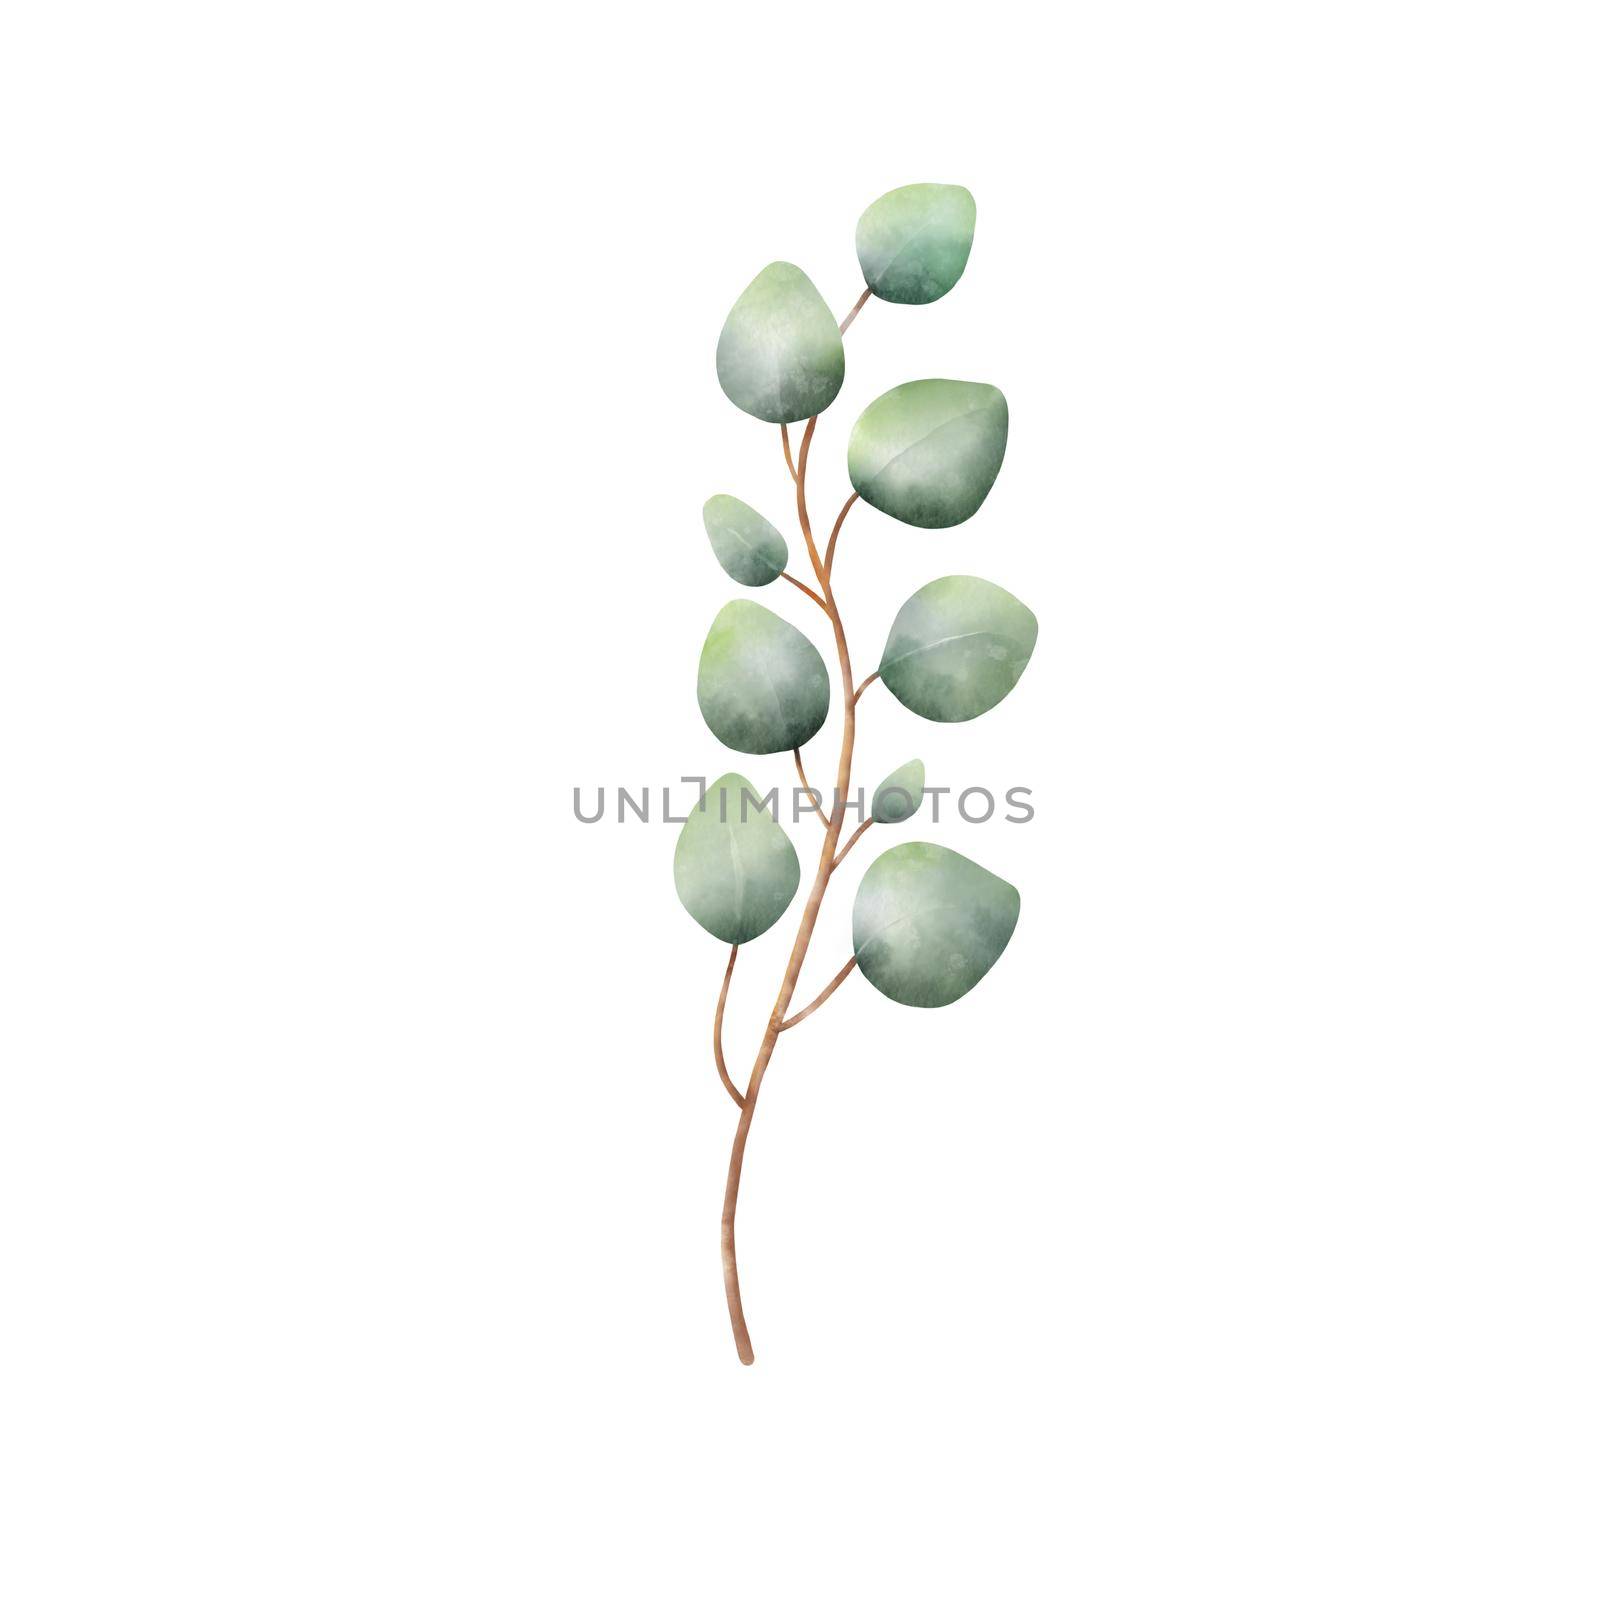 Watercolor Eucaliptus branch drawing. Hand drawn illustration with eucalyptus leaves isolated on white background. Floral herbal image of green plant by ElenaPlatova